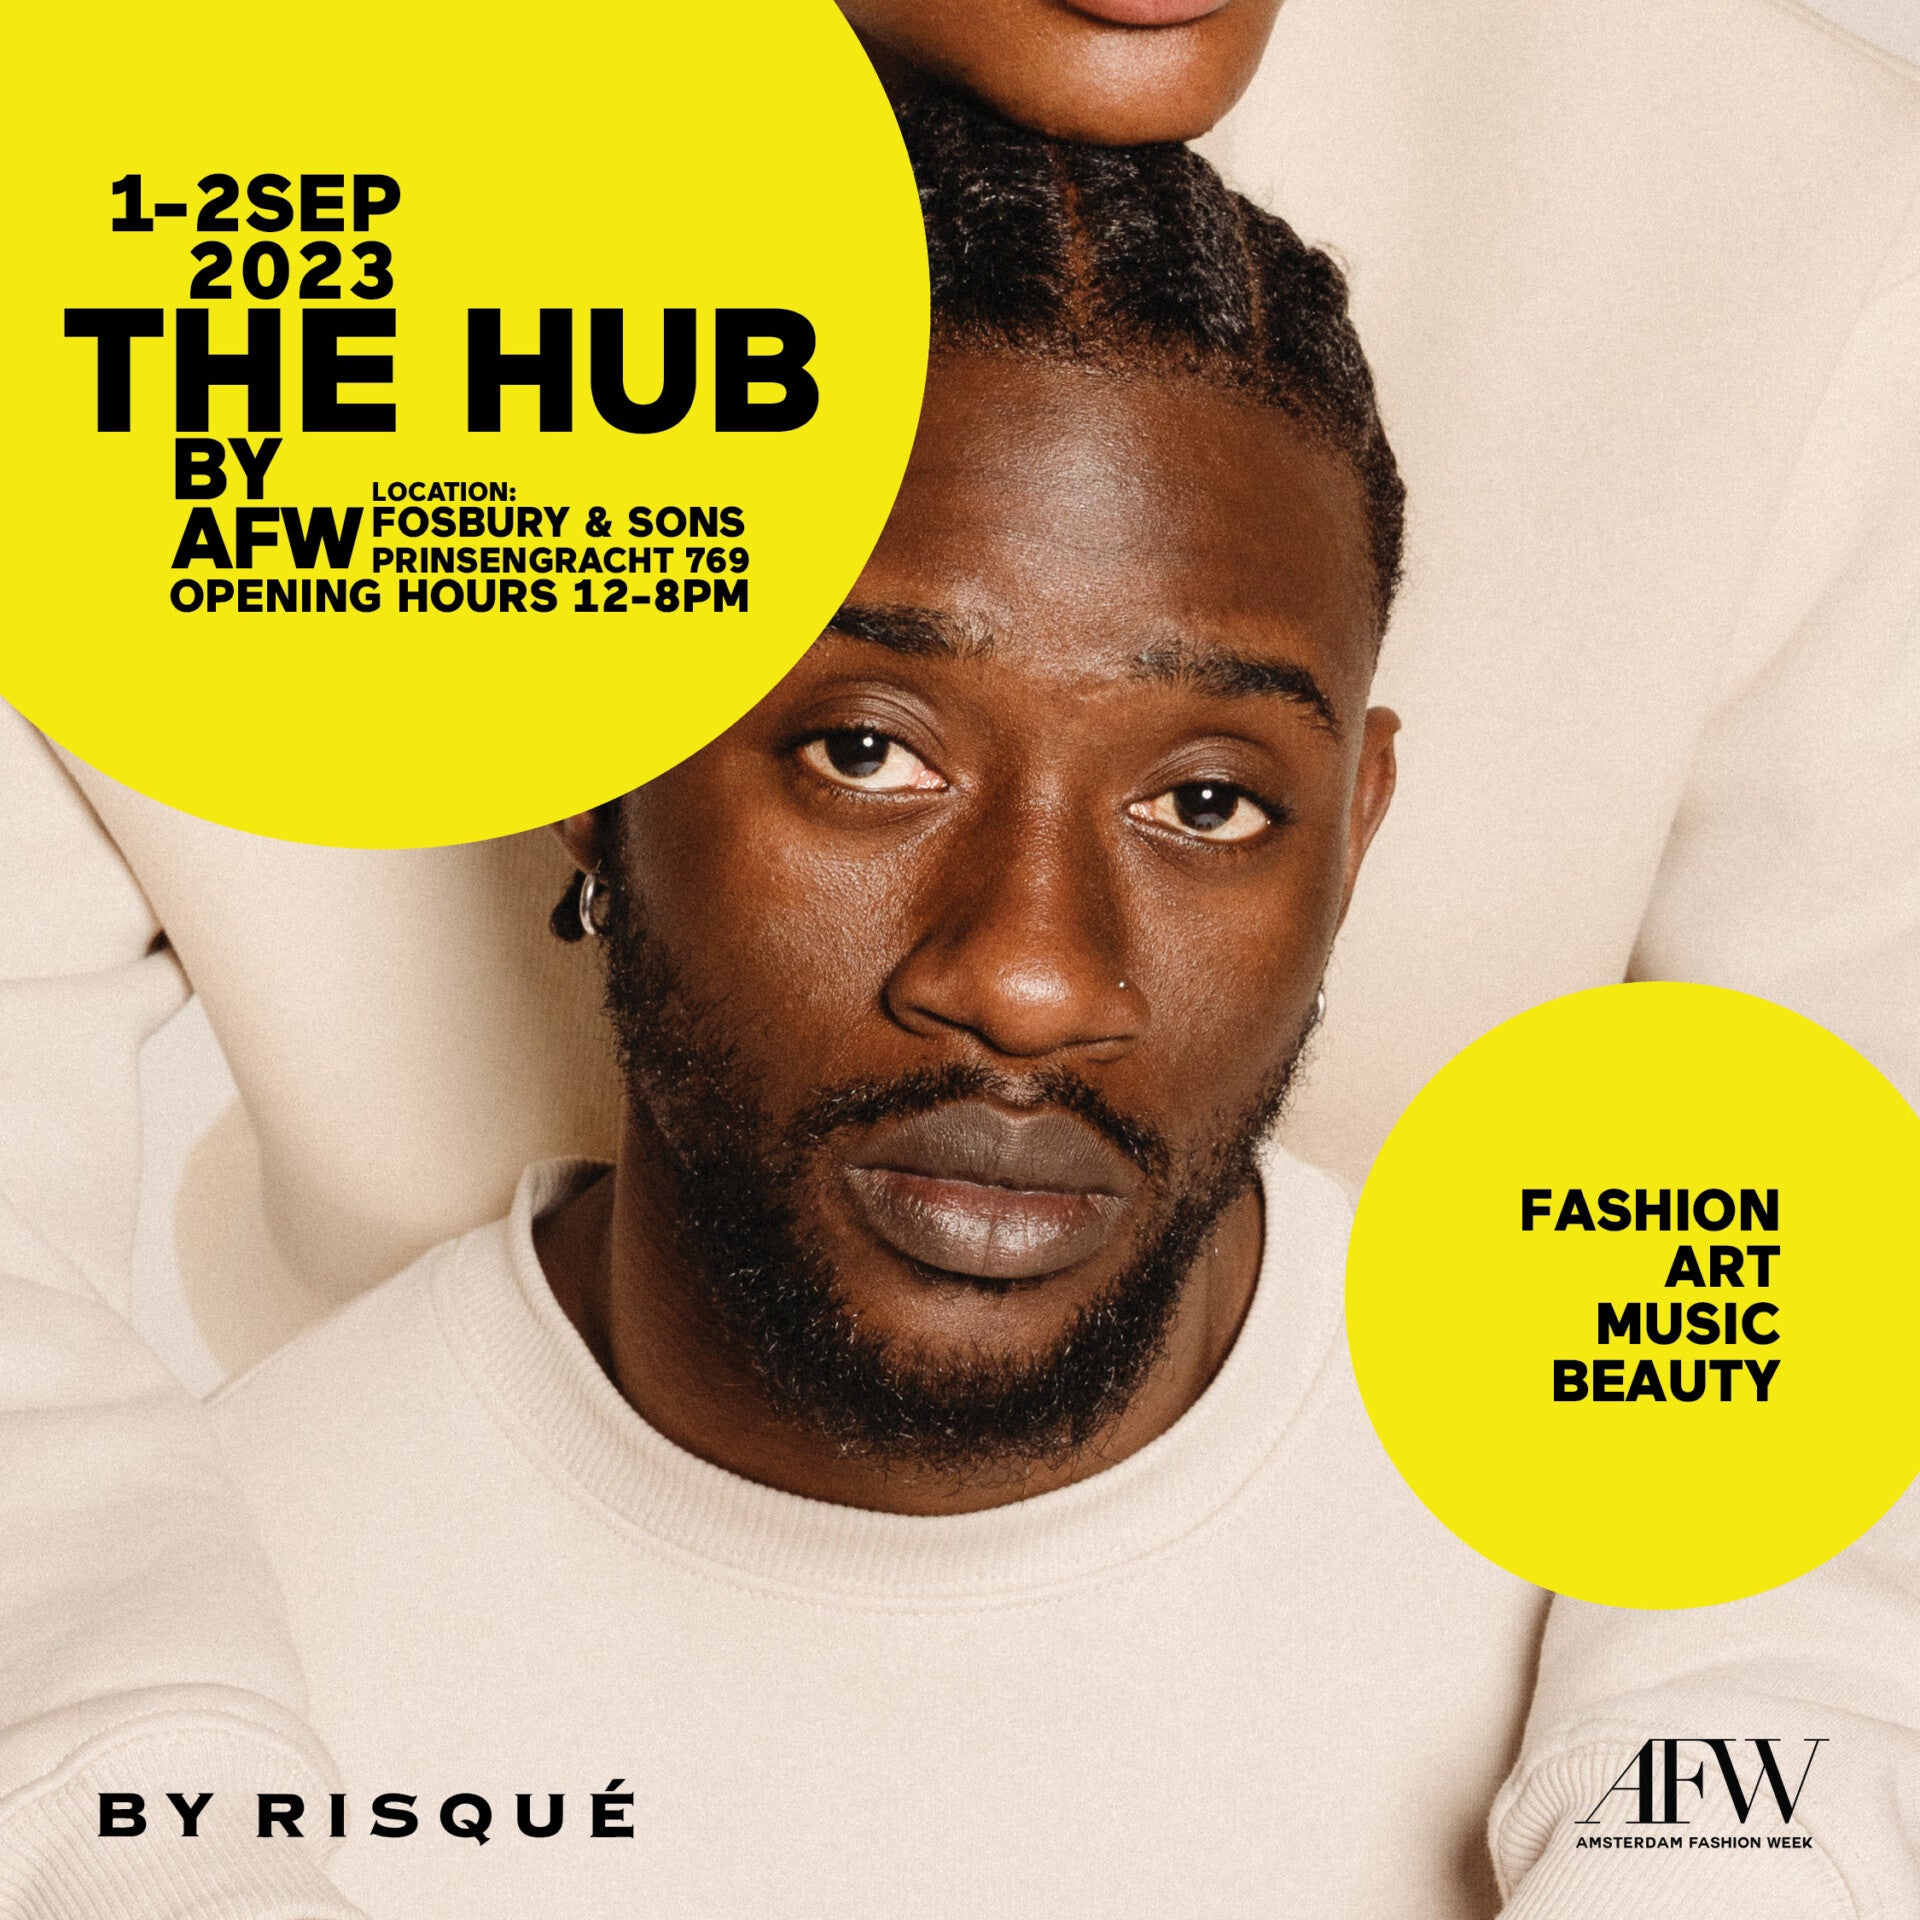 Get Ready for Fashion Frenzy: BY RISQUÉ Takes on AFW’23 at The Hub